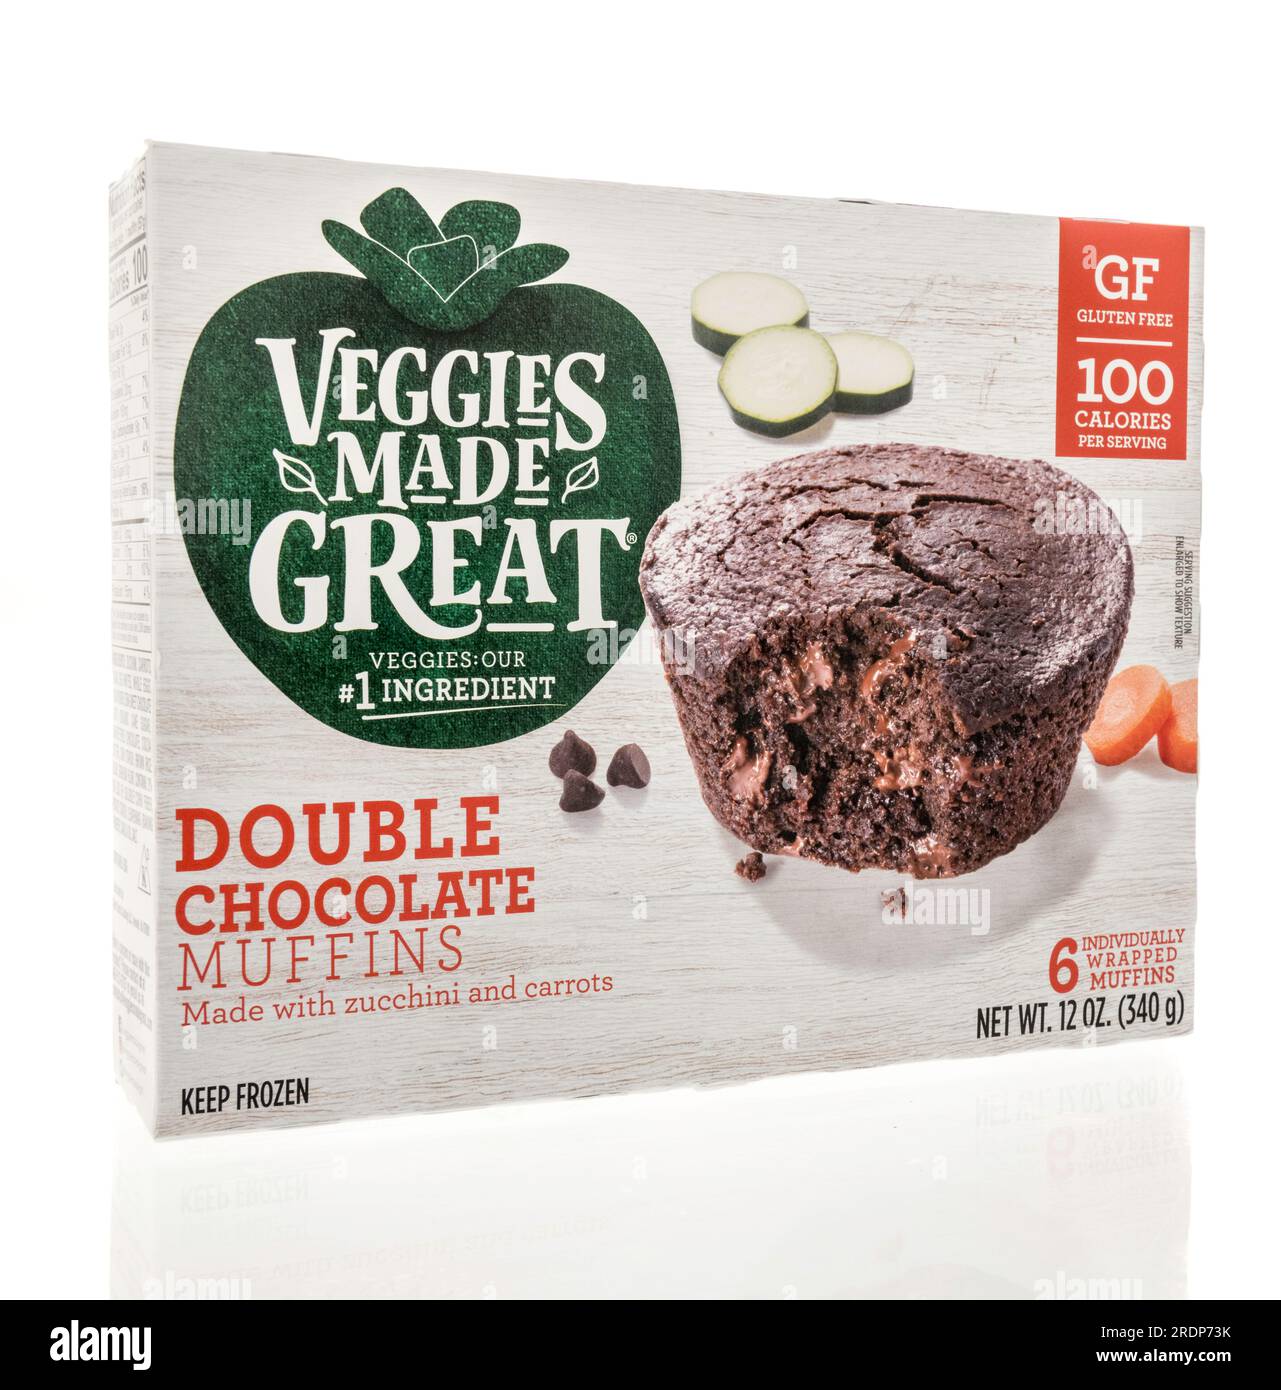 Winneconne, WI - 23 July 2023:  A package of Veggies made great double chocolate muffins on an isolated background Stock Photo